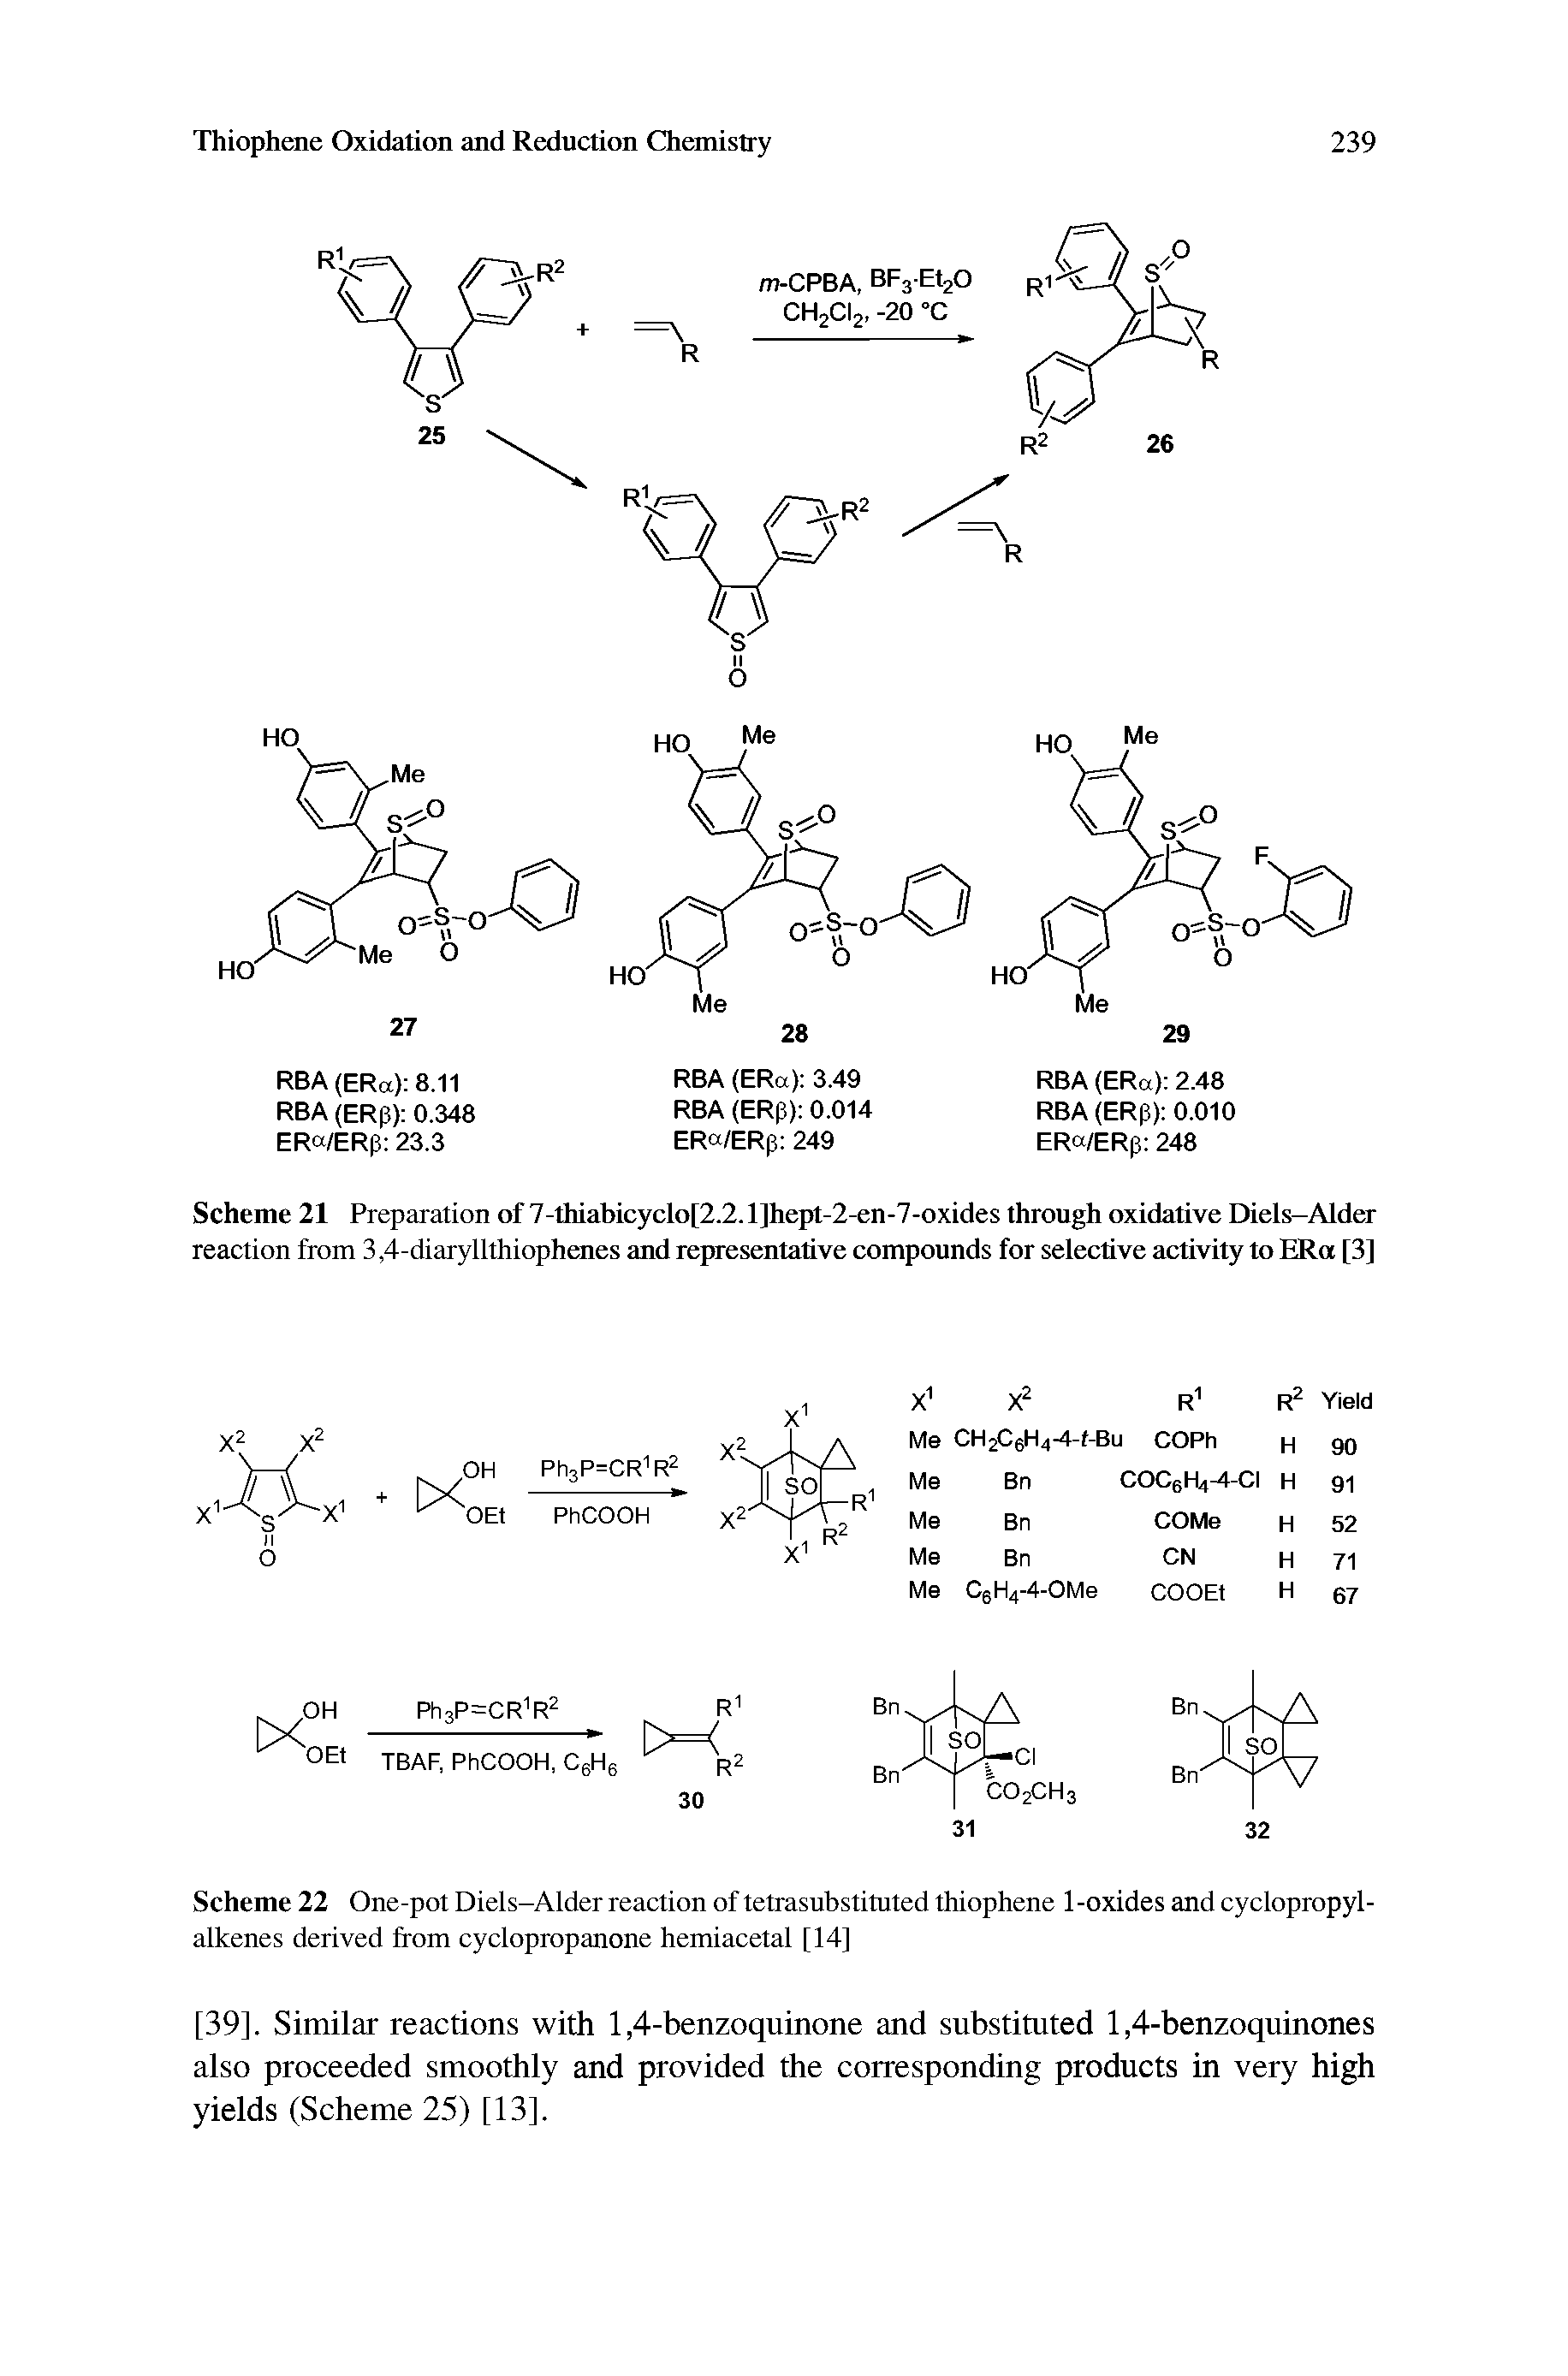 Scheme 22 One-pot Diels-Alder reaction of tetrasubstituted thiophene 1 -oxides and cyclopropyl-alkenes derived from cyclopropanone hemiacetal [14]...